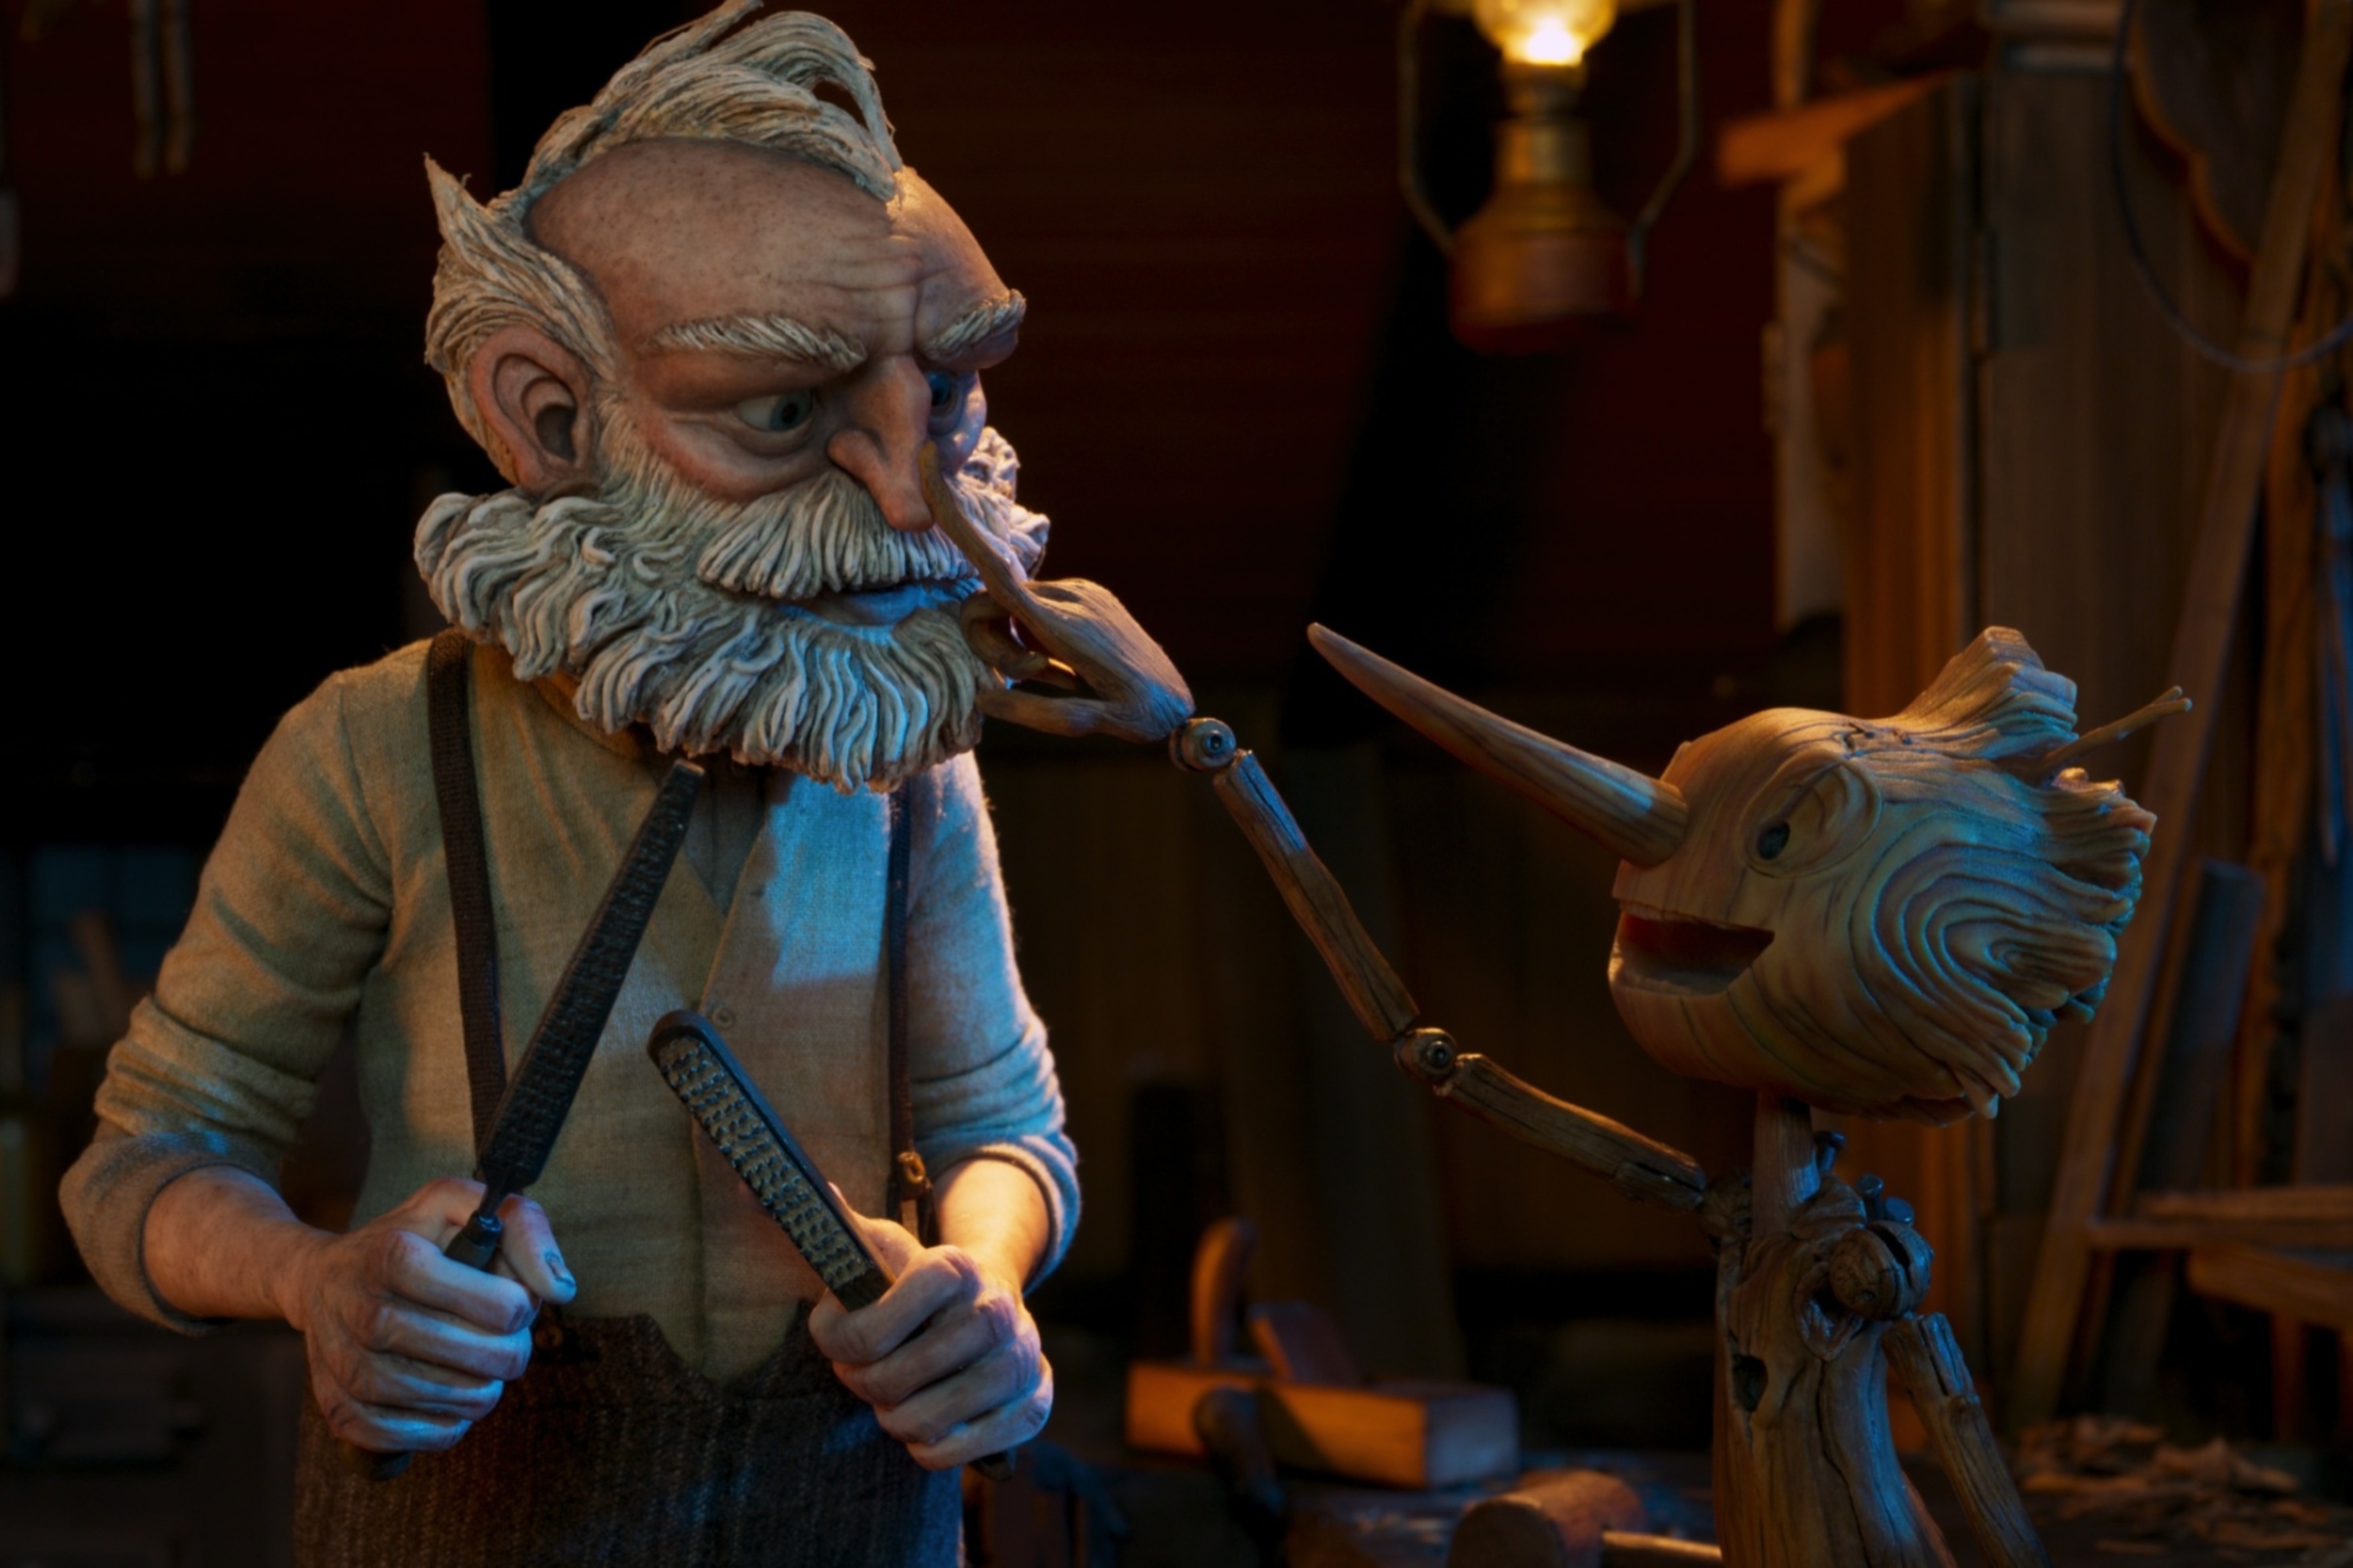 <p>There have been many adaptations of <em>Pinocchio</em>, some being better than others. Guillermo del Toro’s version, released in 2022, is one of the most singular and breathtaking. The beloved tale of a wooden boy brought to life is set against the backdrop of wartime Italy at the height of fascism. Del Toro’s vision is much darker than previous takes and breathes new life into a well-known story. The animation is full of intricate detail, making every frame a sight to behold.</p><p><a href='https://www.msn.com/en-us/community/channel/vid-cj9pqbr0vn9in2b6ddcd8sfgpfq6x6utp44fssrv6mc2gtybw0us'>Follow us on MSN to see more of our exclusive entertainment content.</a></p>